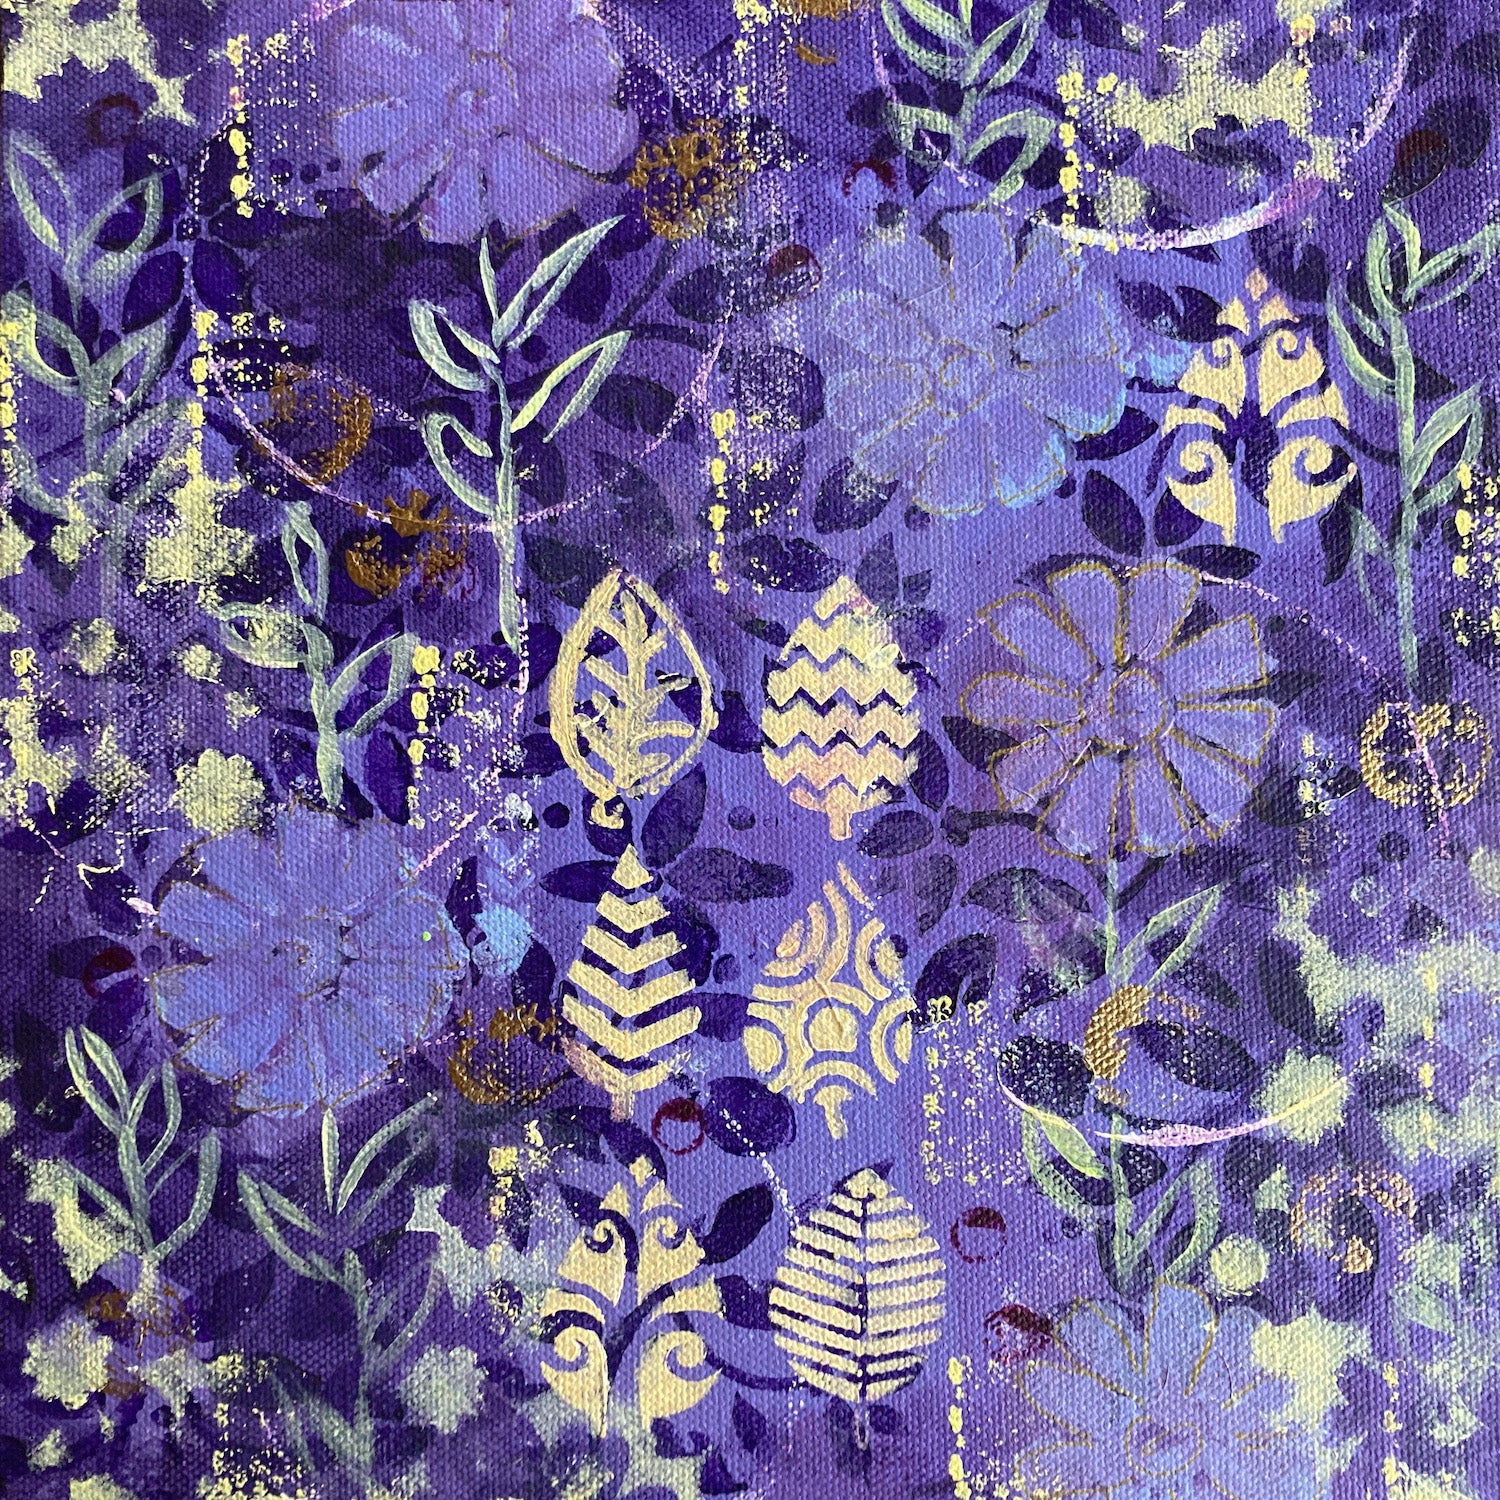 original abstract acrylic floral painting purple flowers and green leaves on purple background cream leaf shapes mysterious and vibrant 